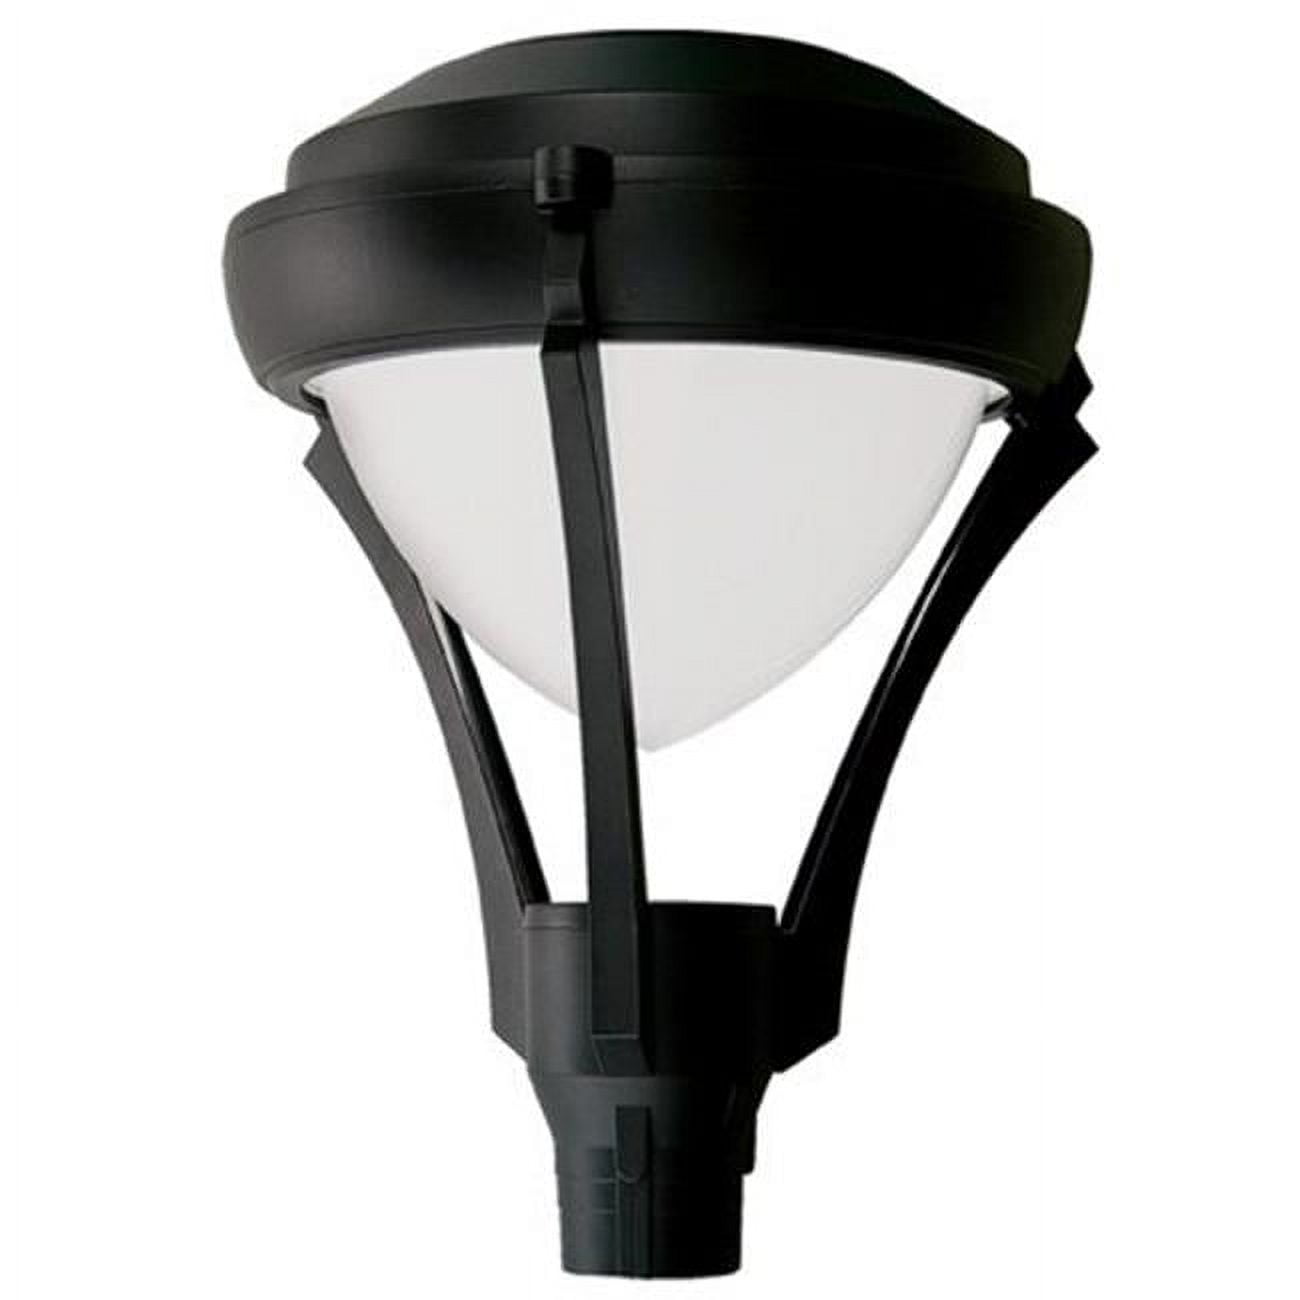 Picture of Dabmar Lighting GM596-B 50W 120V Powder Coated Cast Aluminum Post Top Light Fixture with Metal Halide Lamp, Black - 27.95 x 21.65 x 21.65 in.